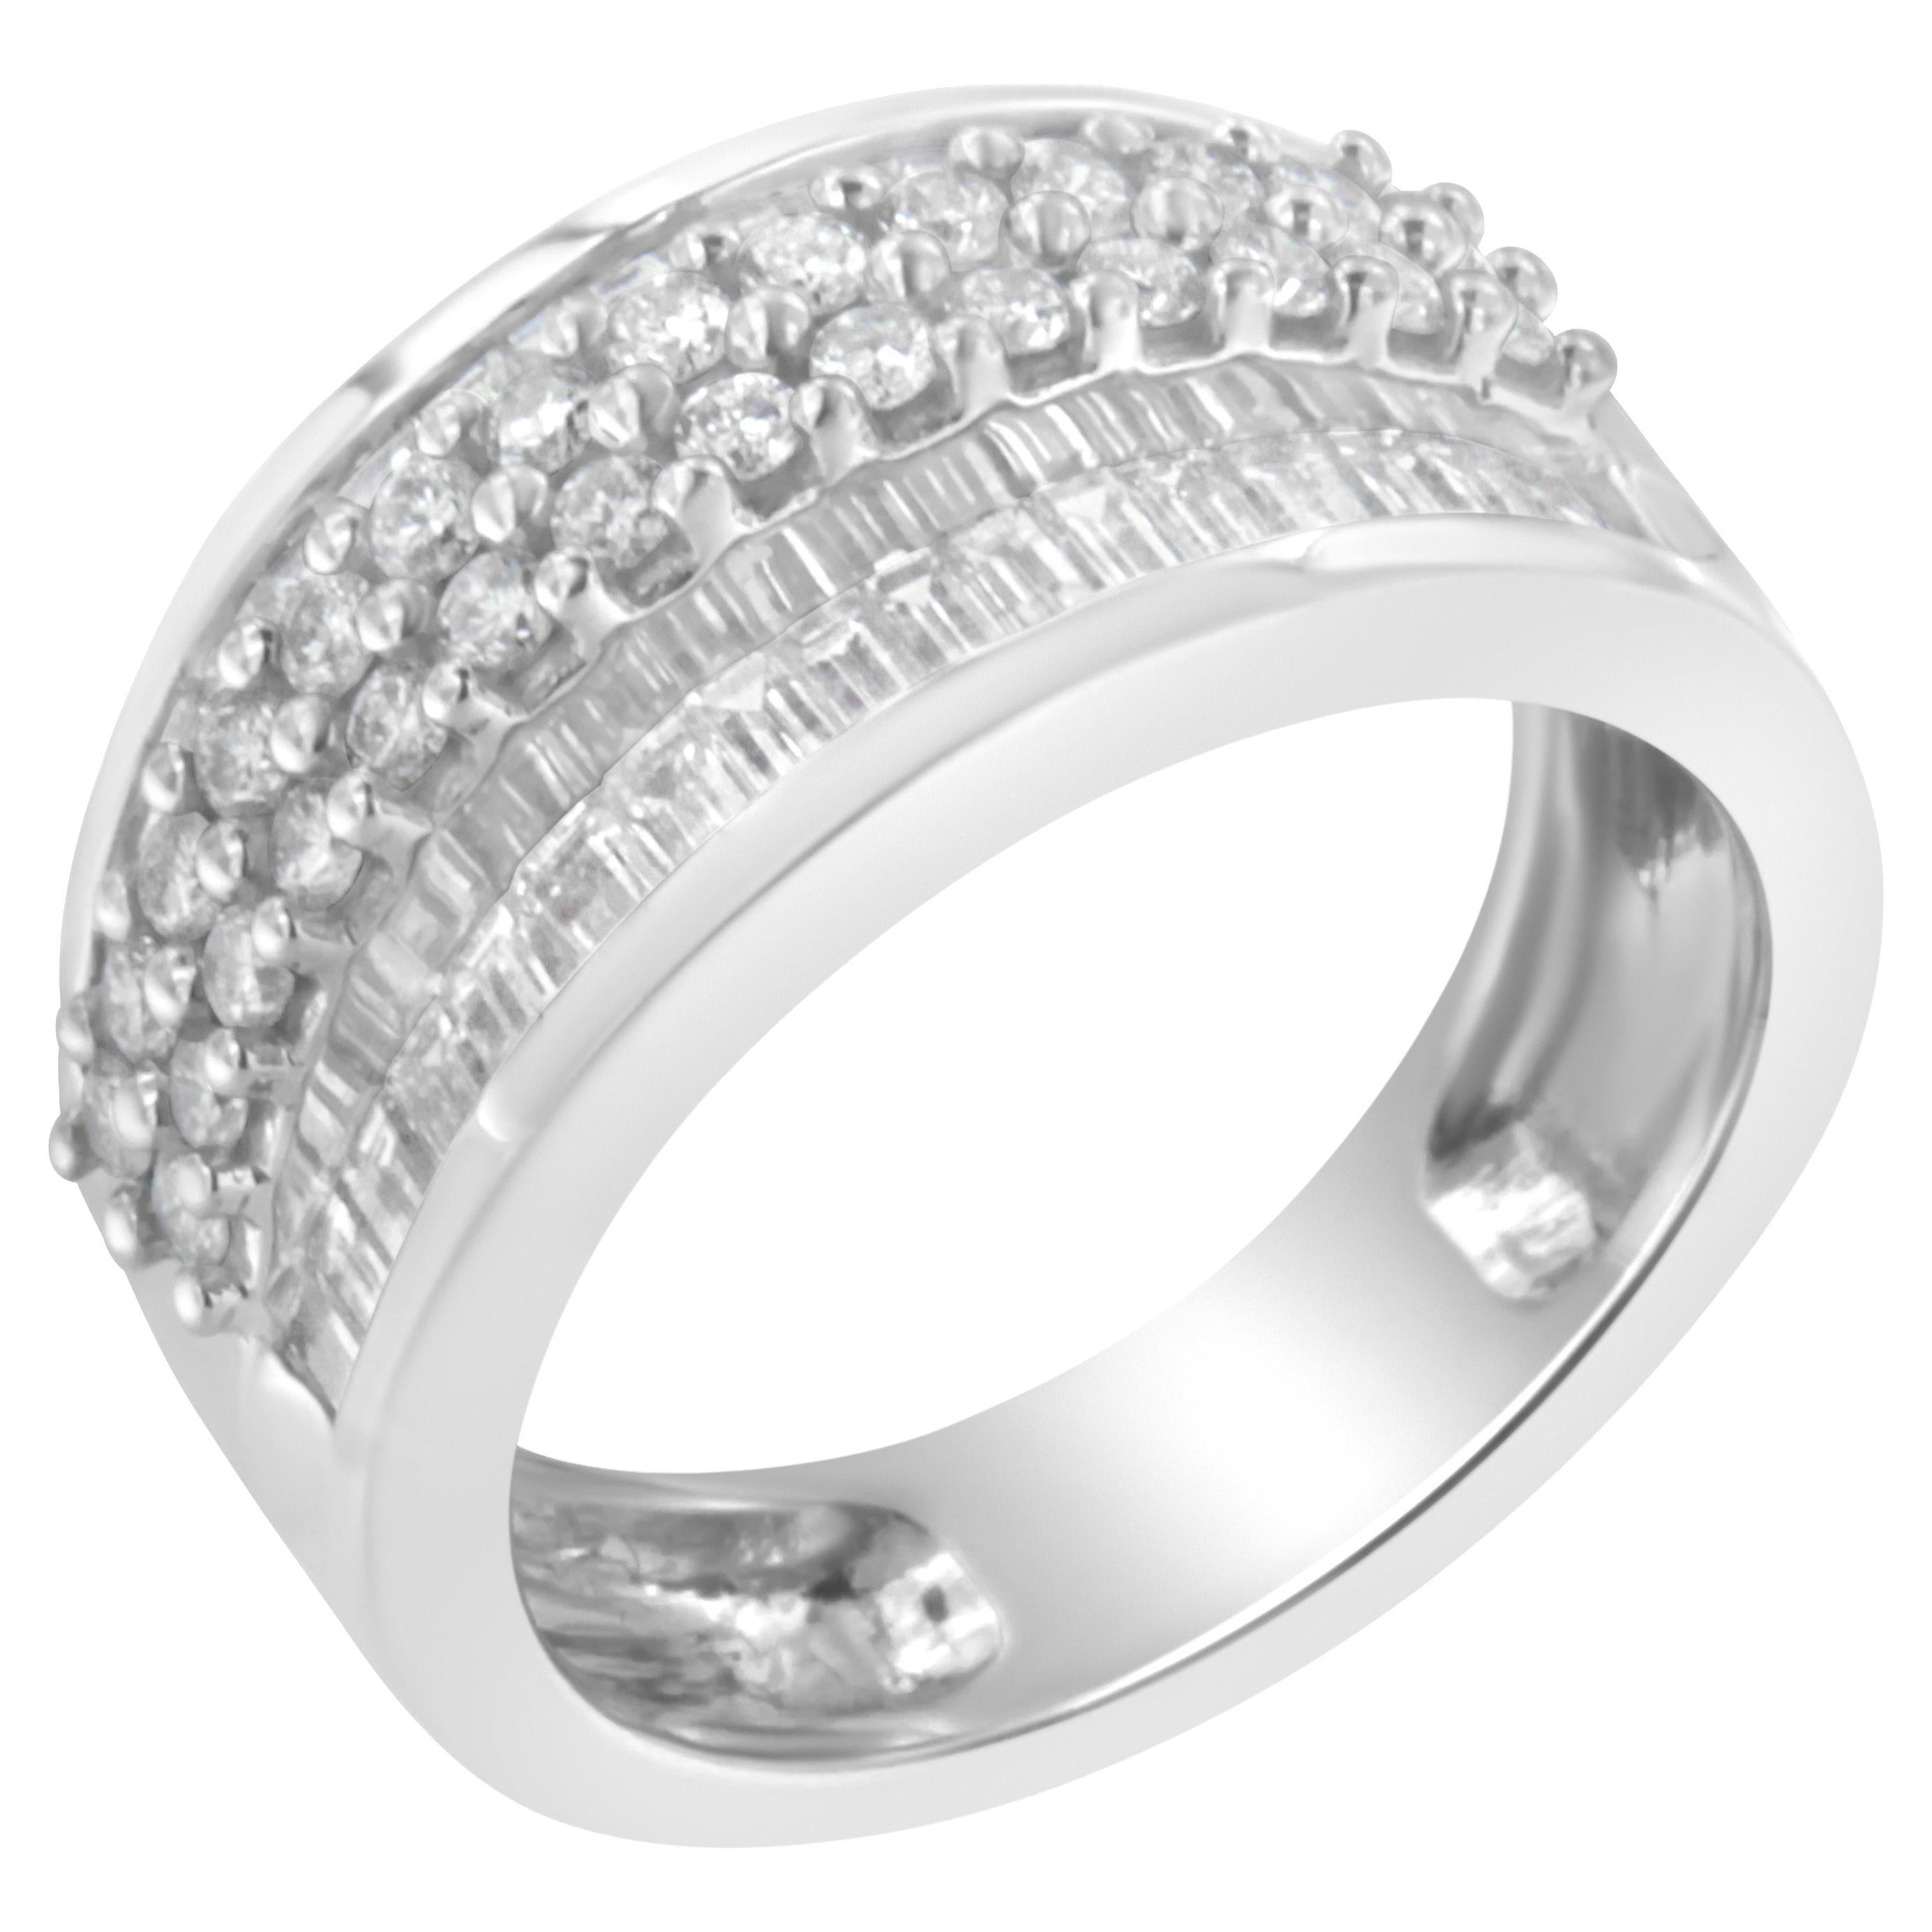 For Sale:  14K White Gold 1 1/2 Carat Round and Baguette Diamond Ring